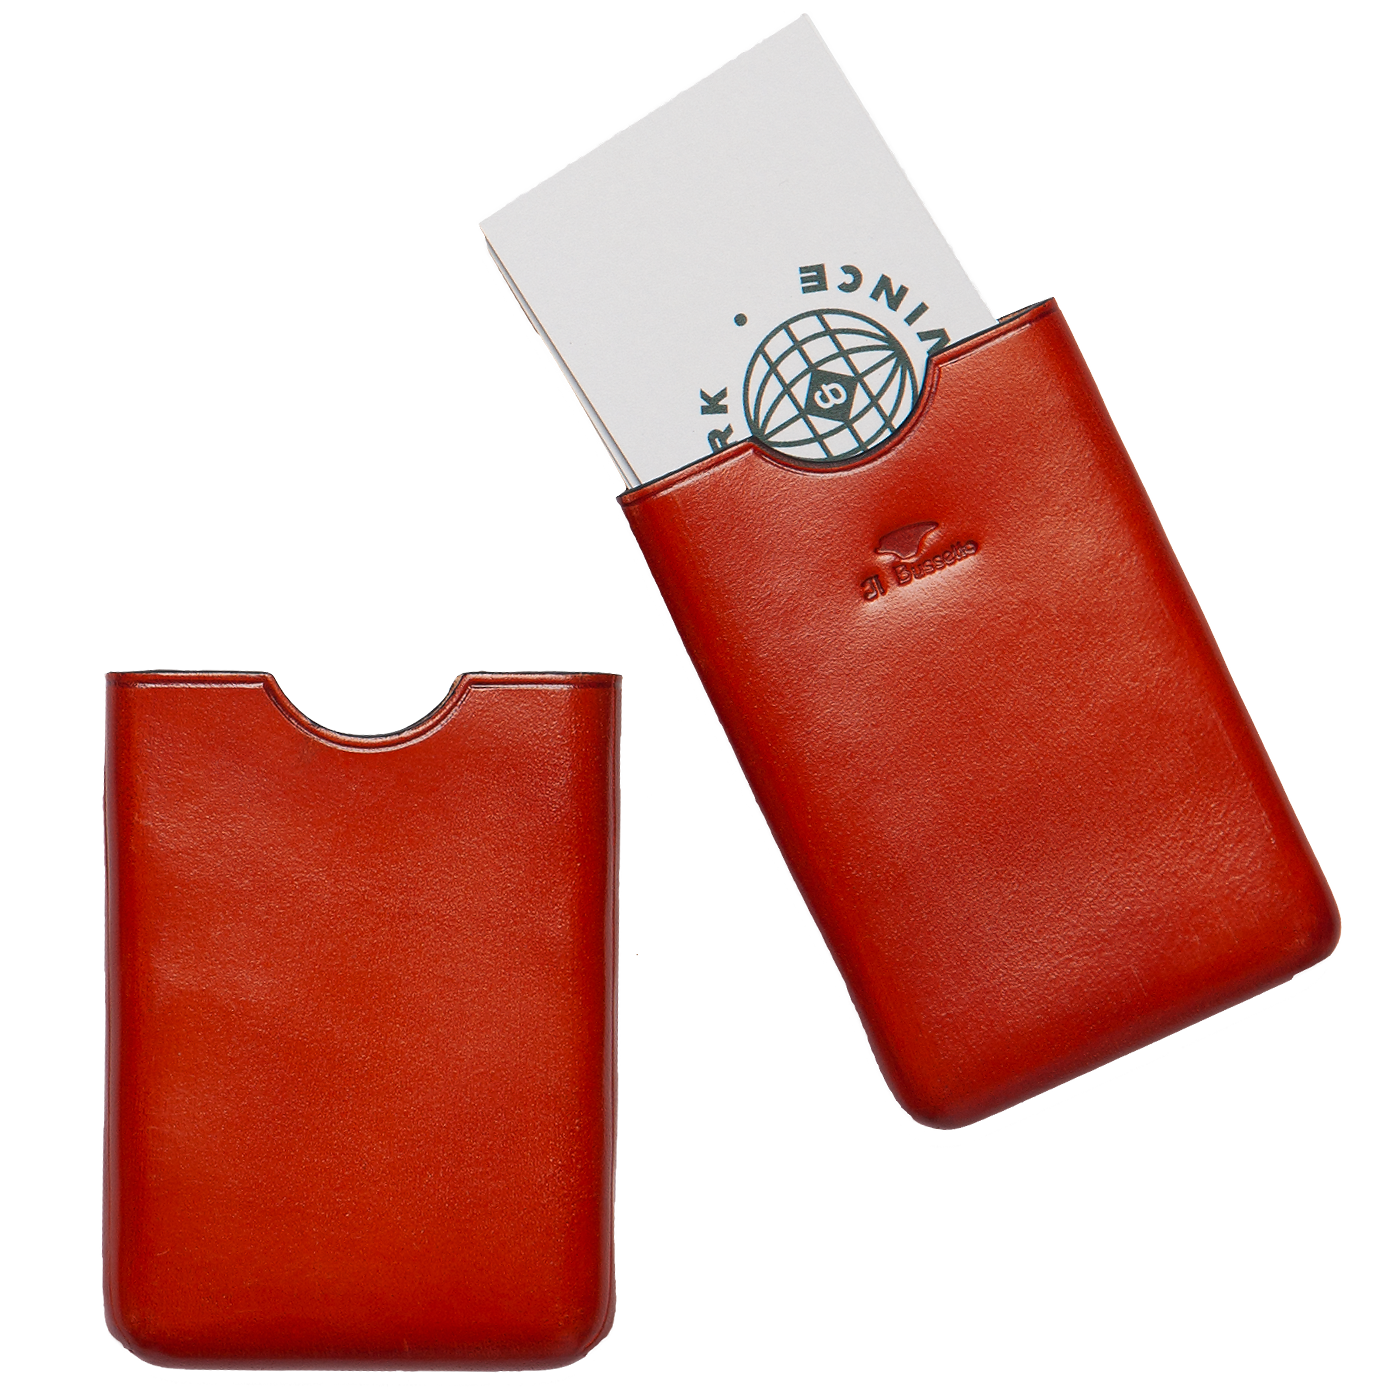 Business Card Holder - Coral Red